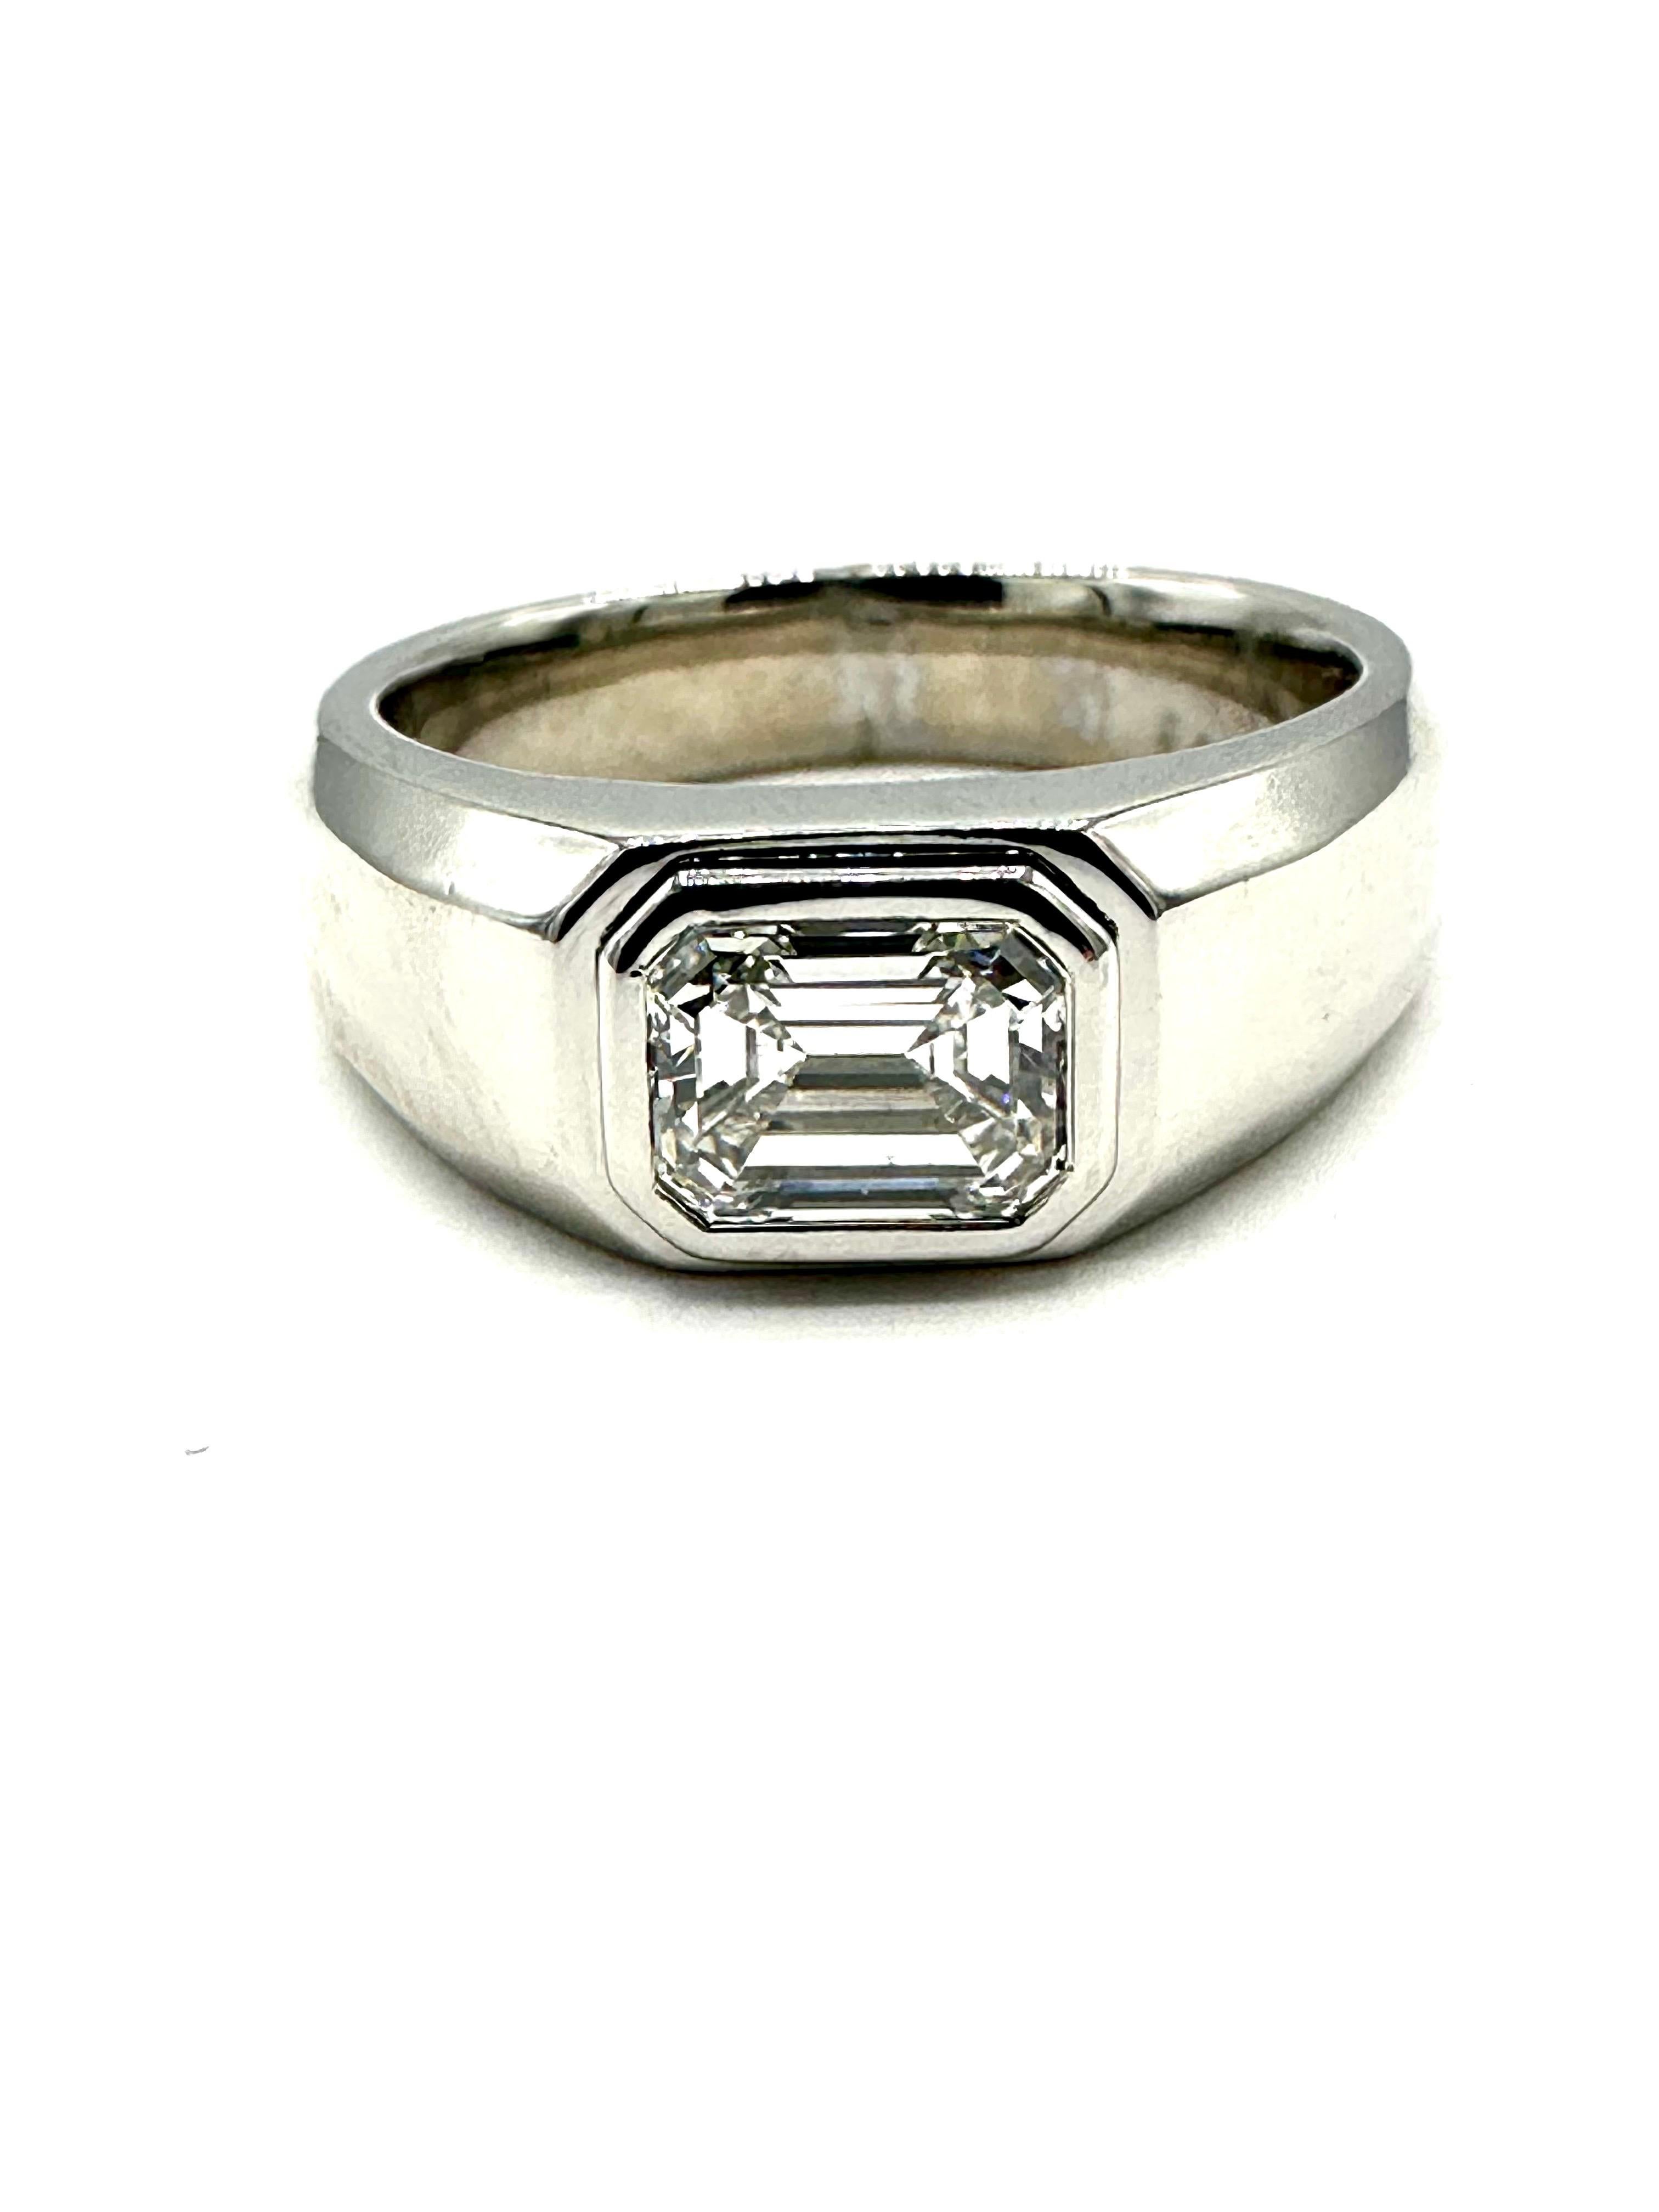 A great new design by Tiffany & Co.!  This is the Charles Tiffany Diamond men's ring!  The 1.03 carat emerald cut Diamond is bezel set in the Charles Tiffany platinum setting.  The Diamond has a Tiffany & Co. Diamond certificate number 73955831.  It